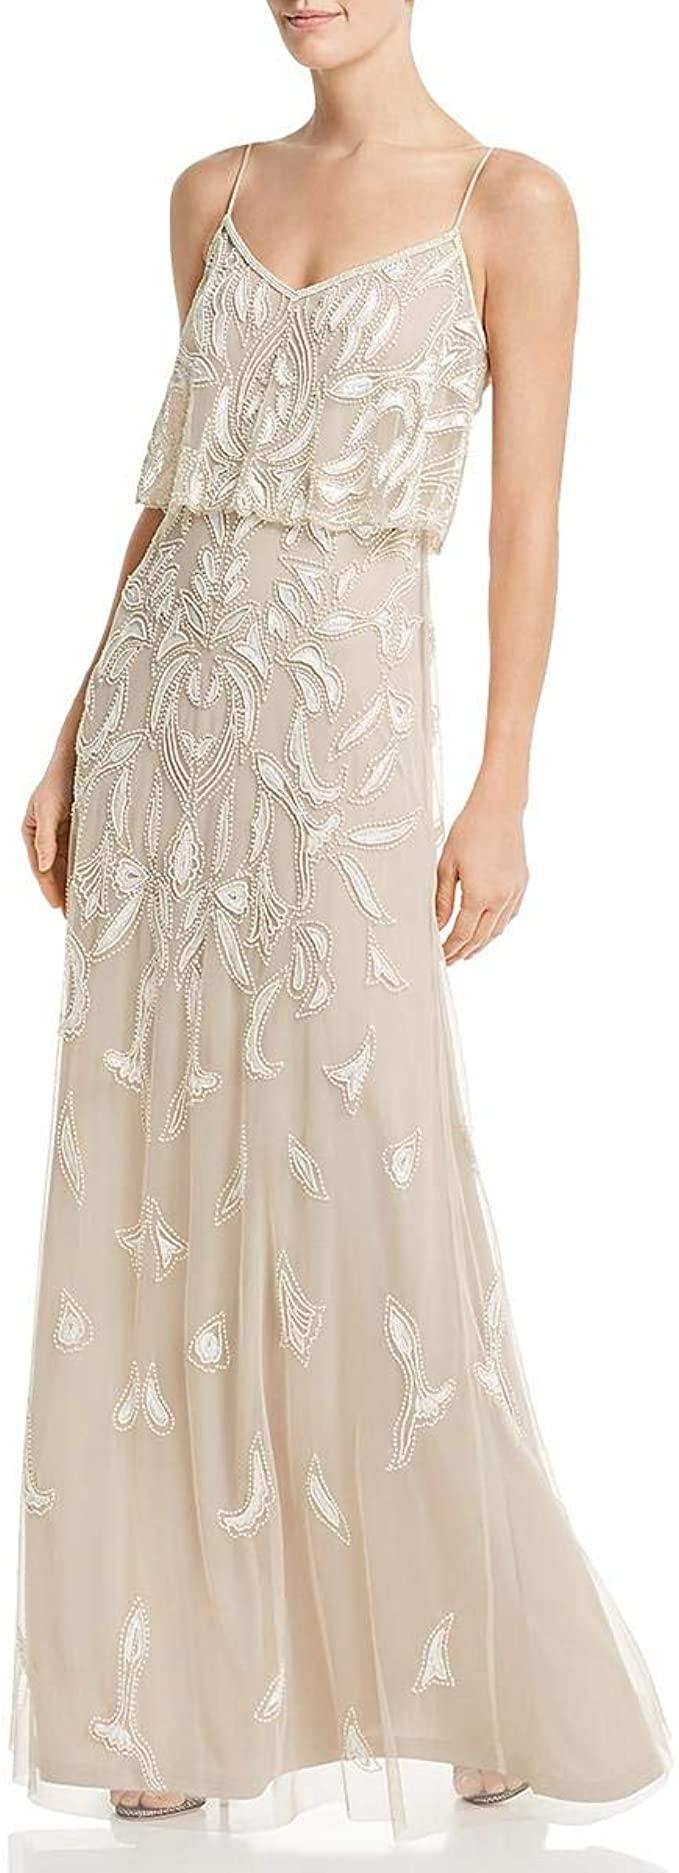 Adrianna Papell Formal Beaded Long Dress AP1E205376 - The Dress Outlet